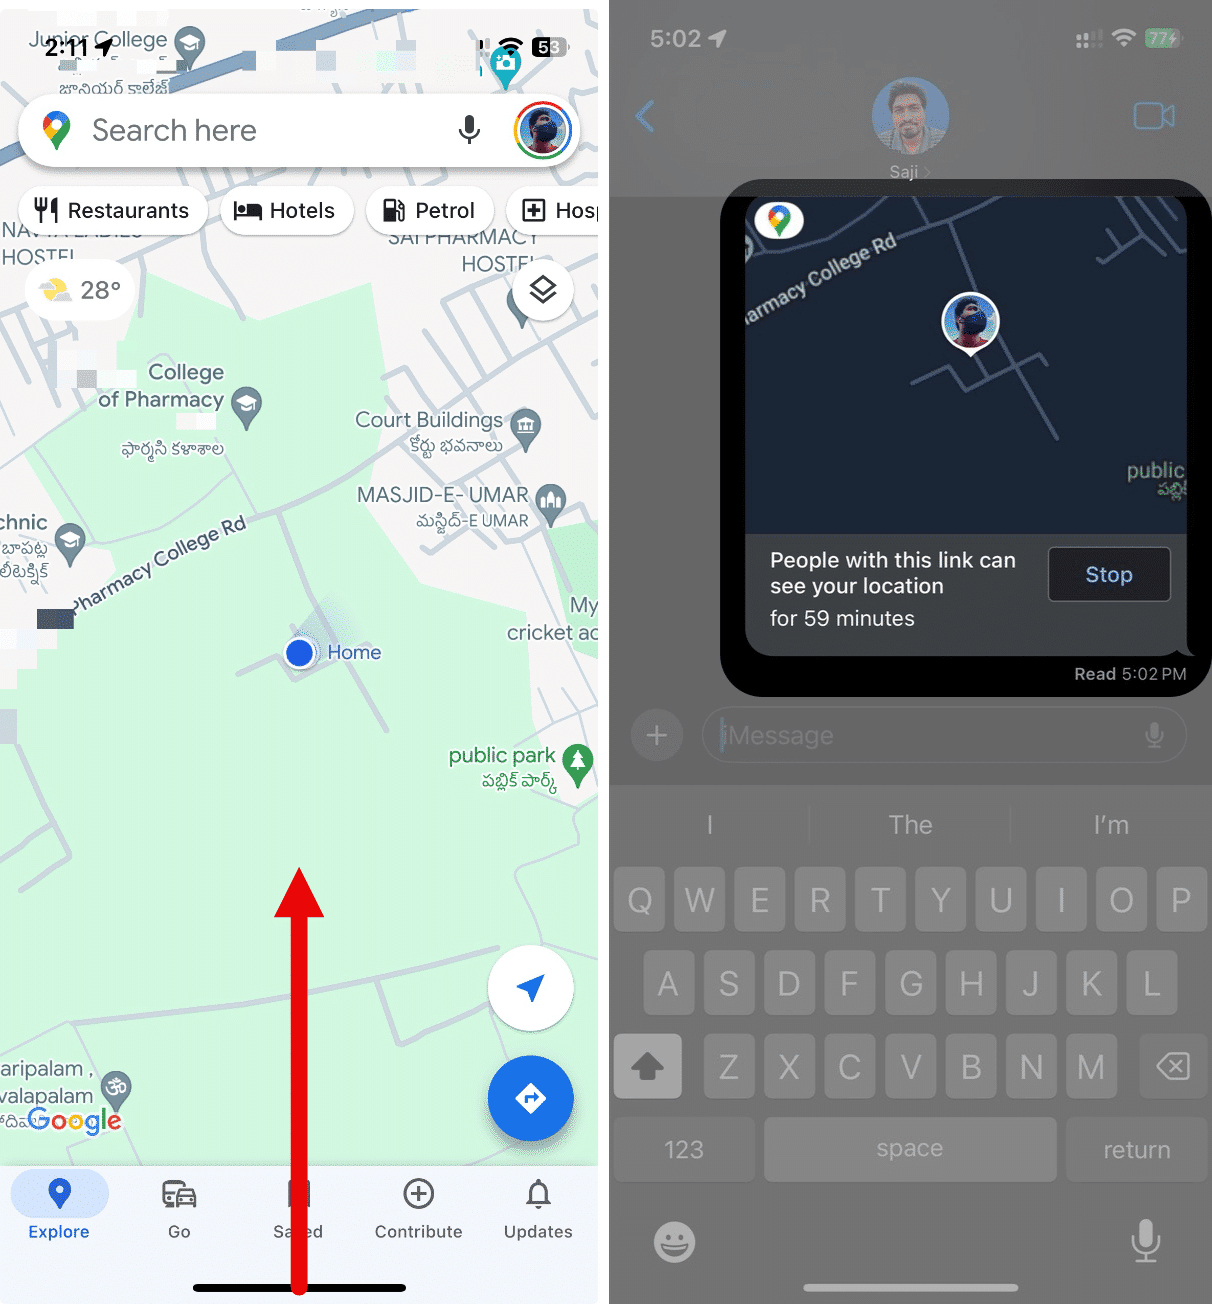 Swipe up from Google Maps and go back to Messages app